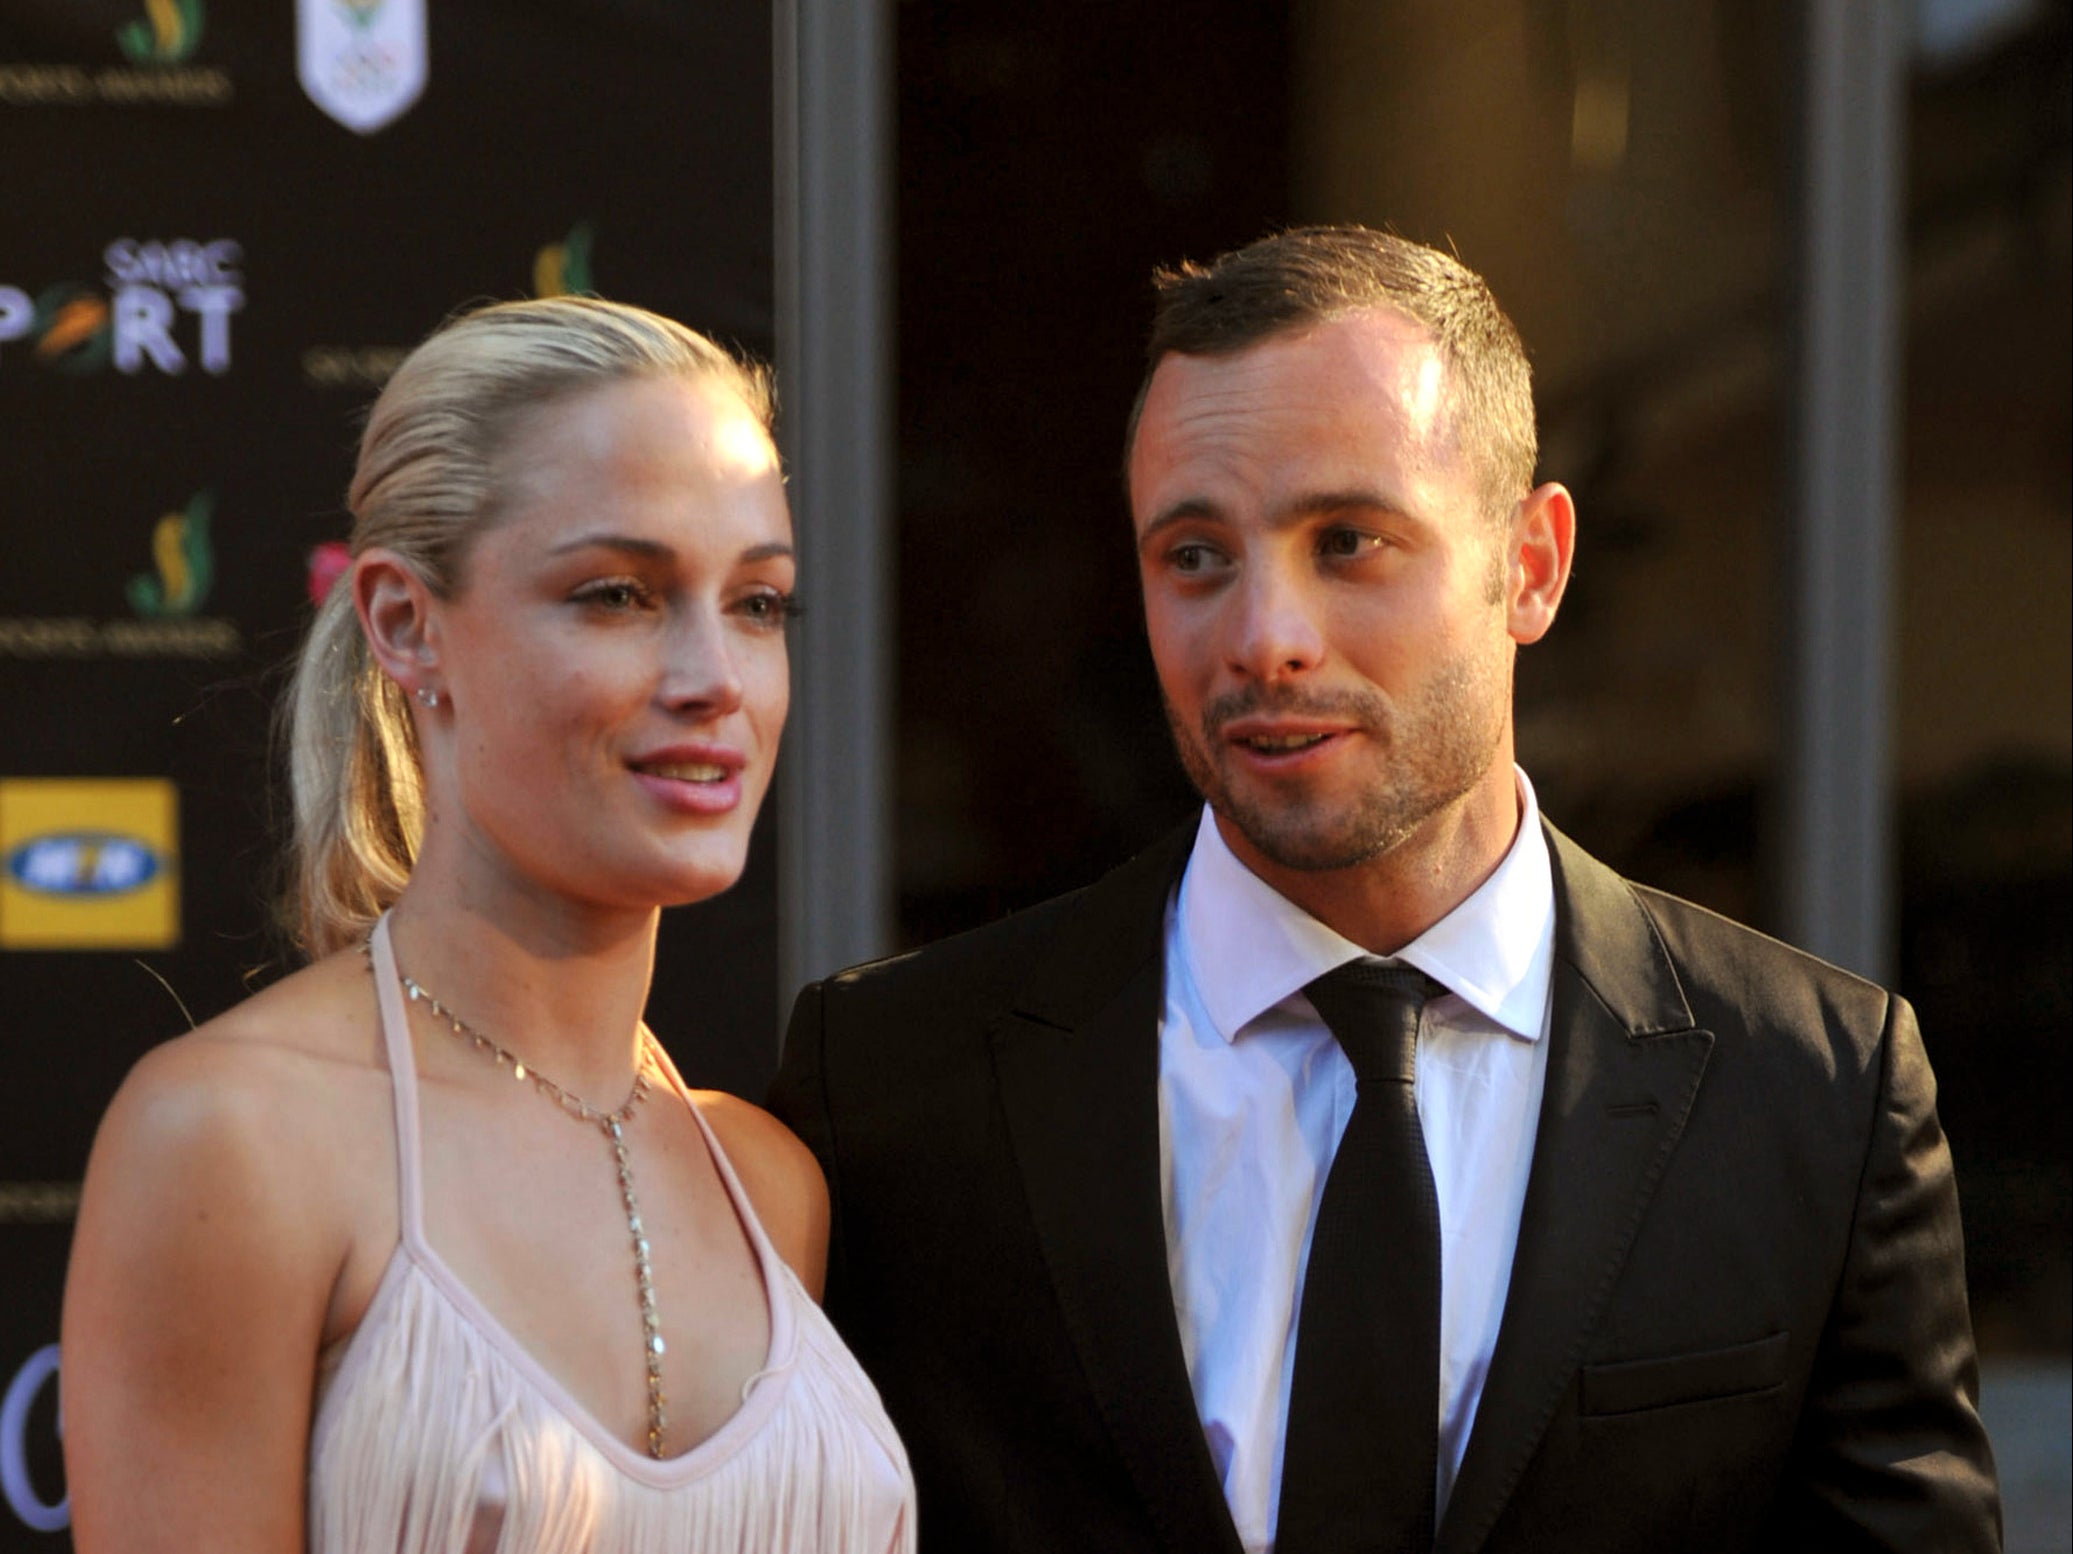 Oscar Pistorius and Reeva Steenkamp in 2012 - a year before he killed her at their apartment